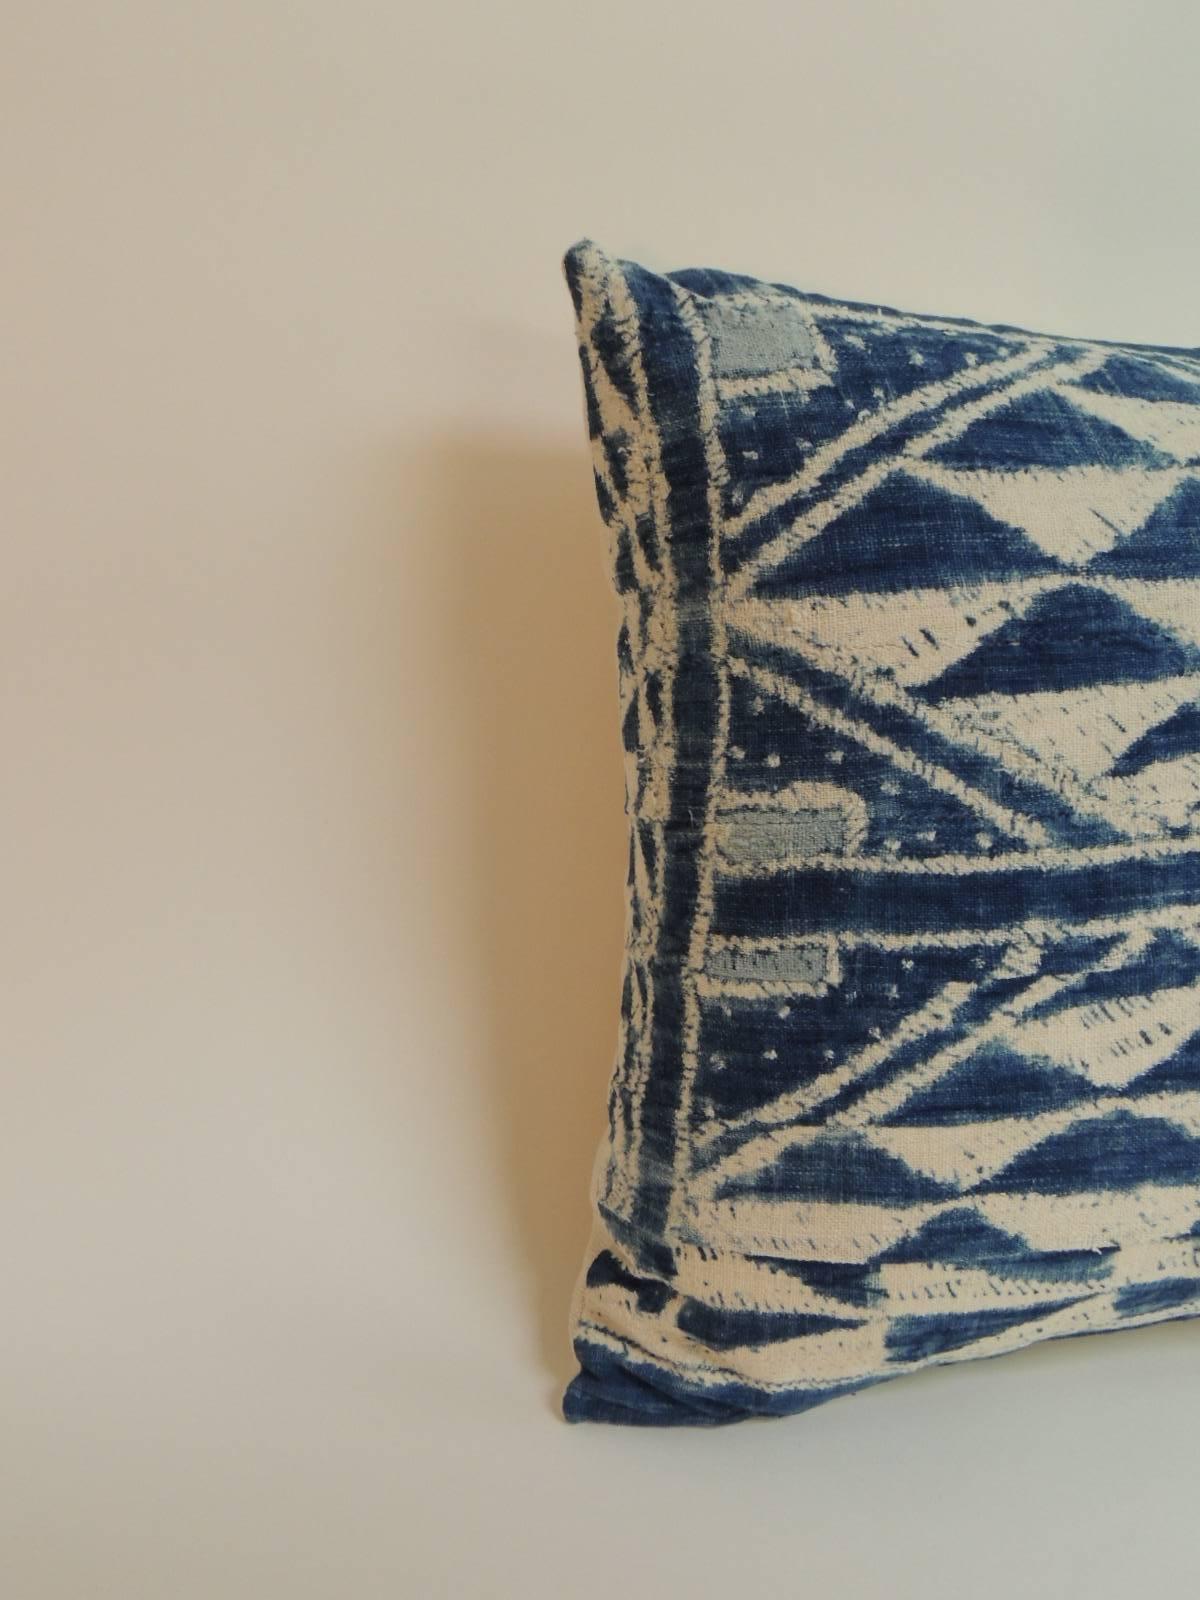 Cameroonian 19th Century Blue and White “Ndop” African Woven Decorative Bolster Pillow